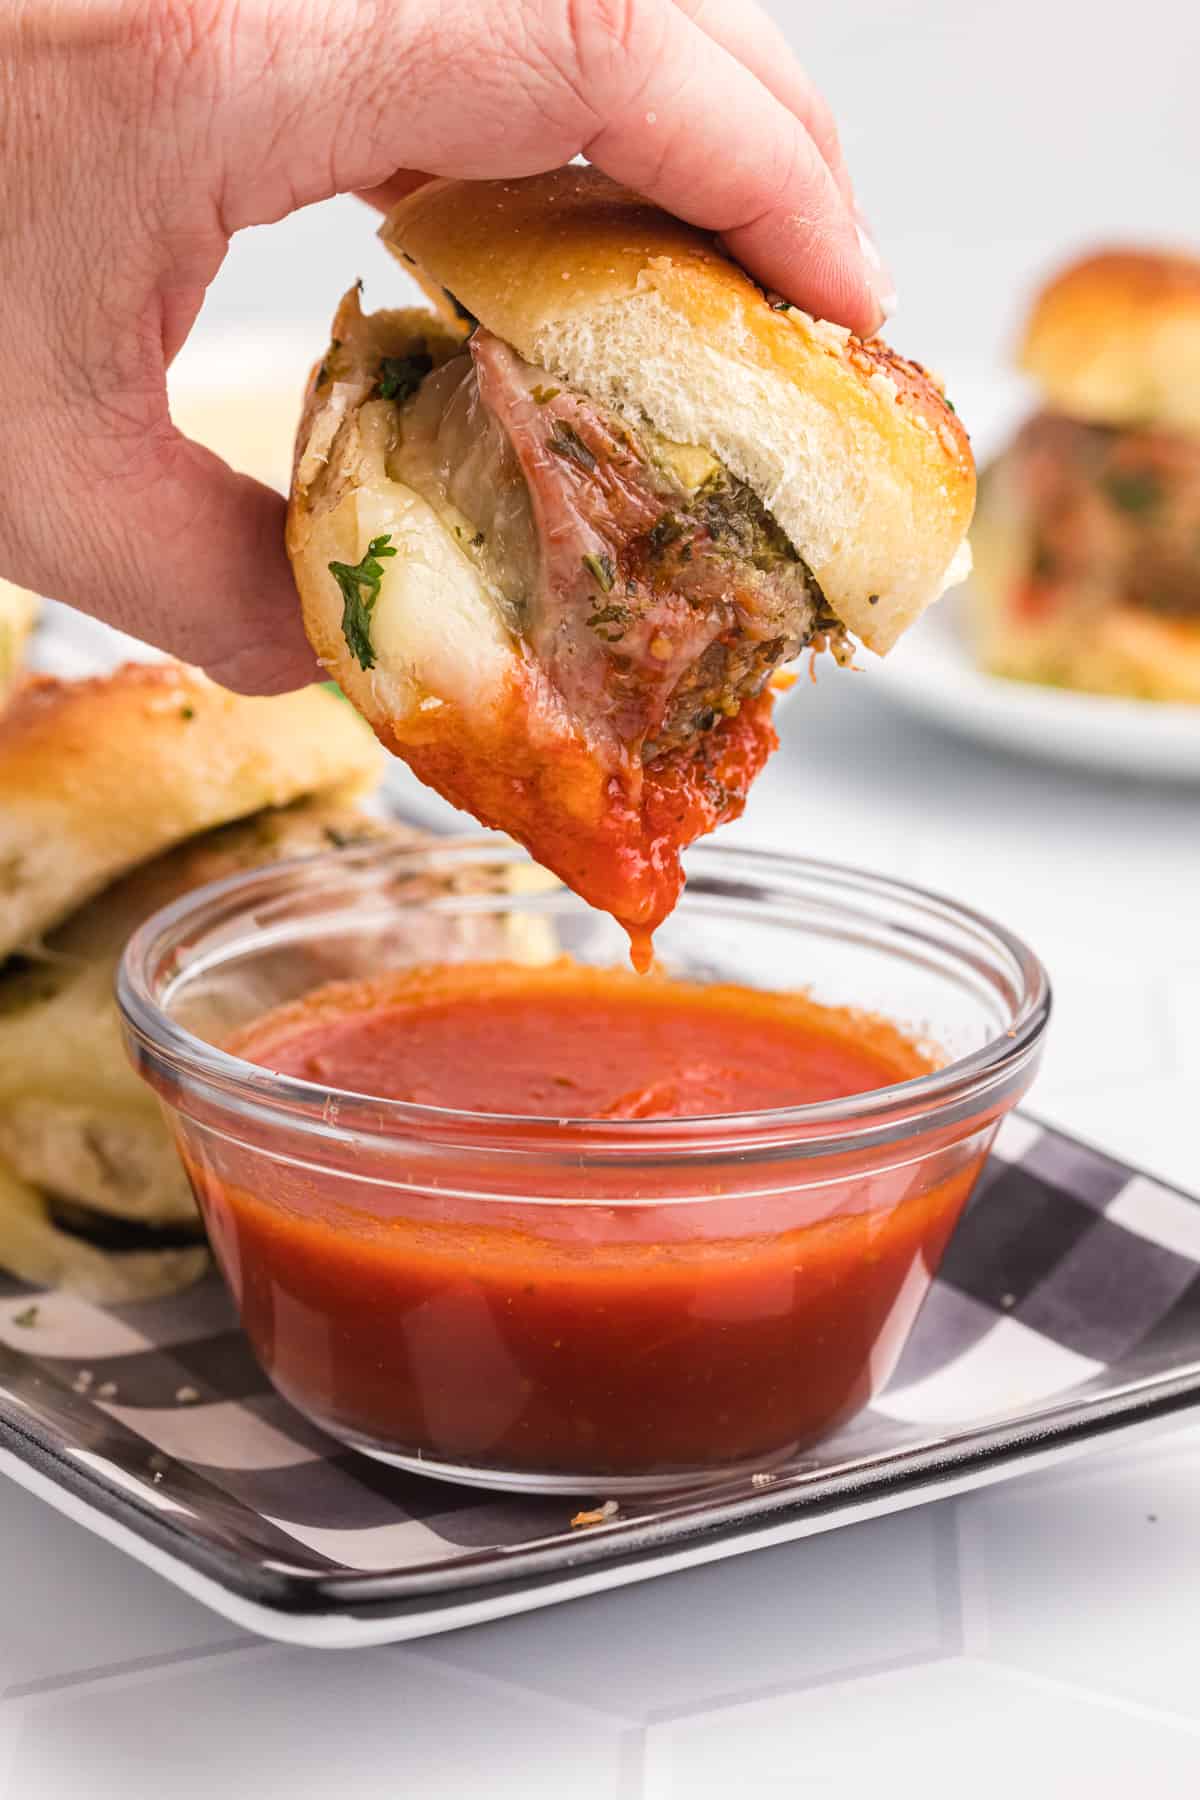 Meatball Slider being dipped into a glass bowl of marinara.